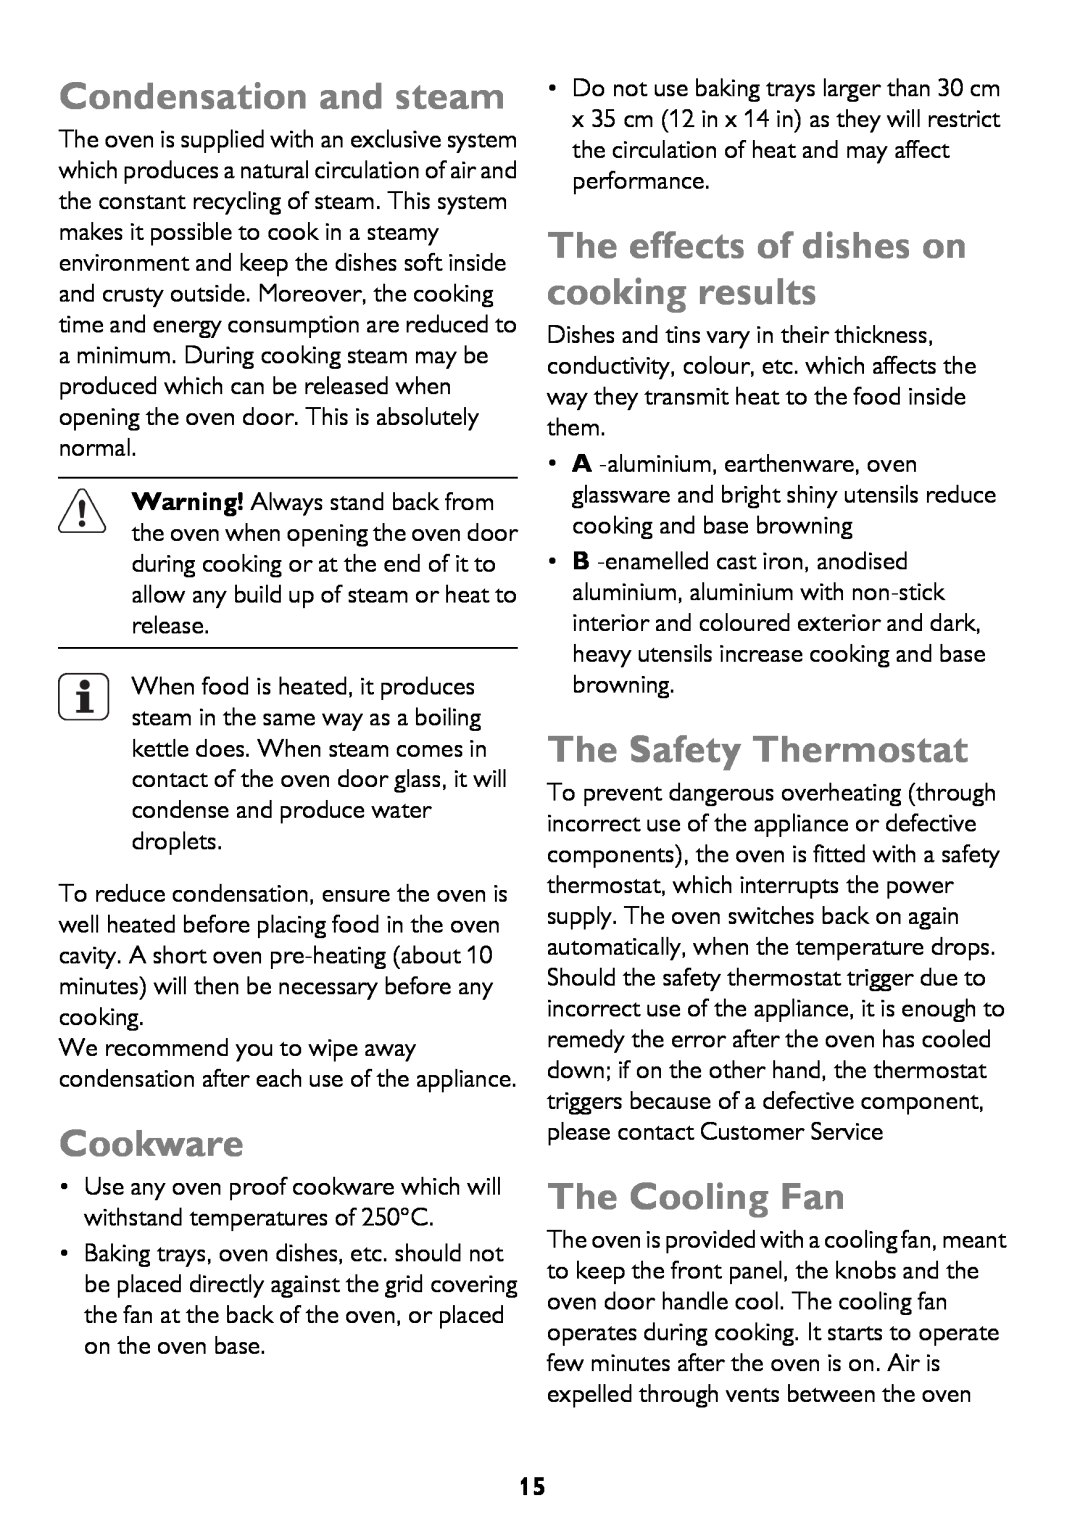 John Lewis JLBIOS662 Condensation and steam, Cookware, The effects of dishes on cooking results, The Safety Thermostat 